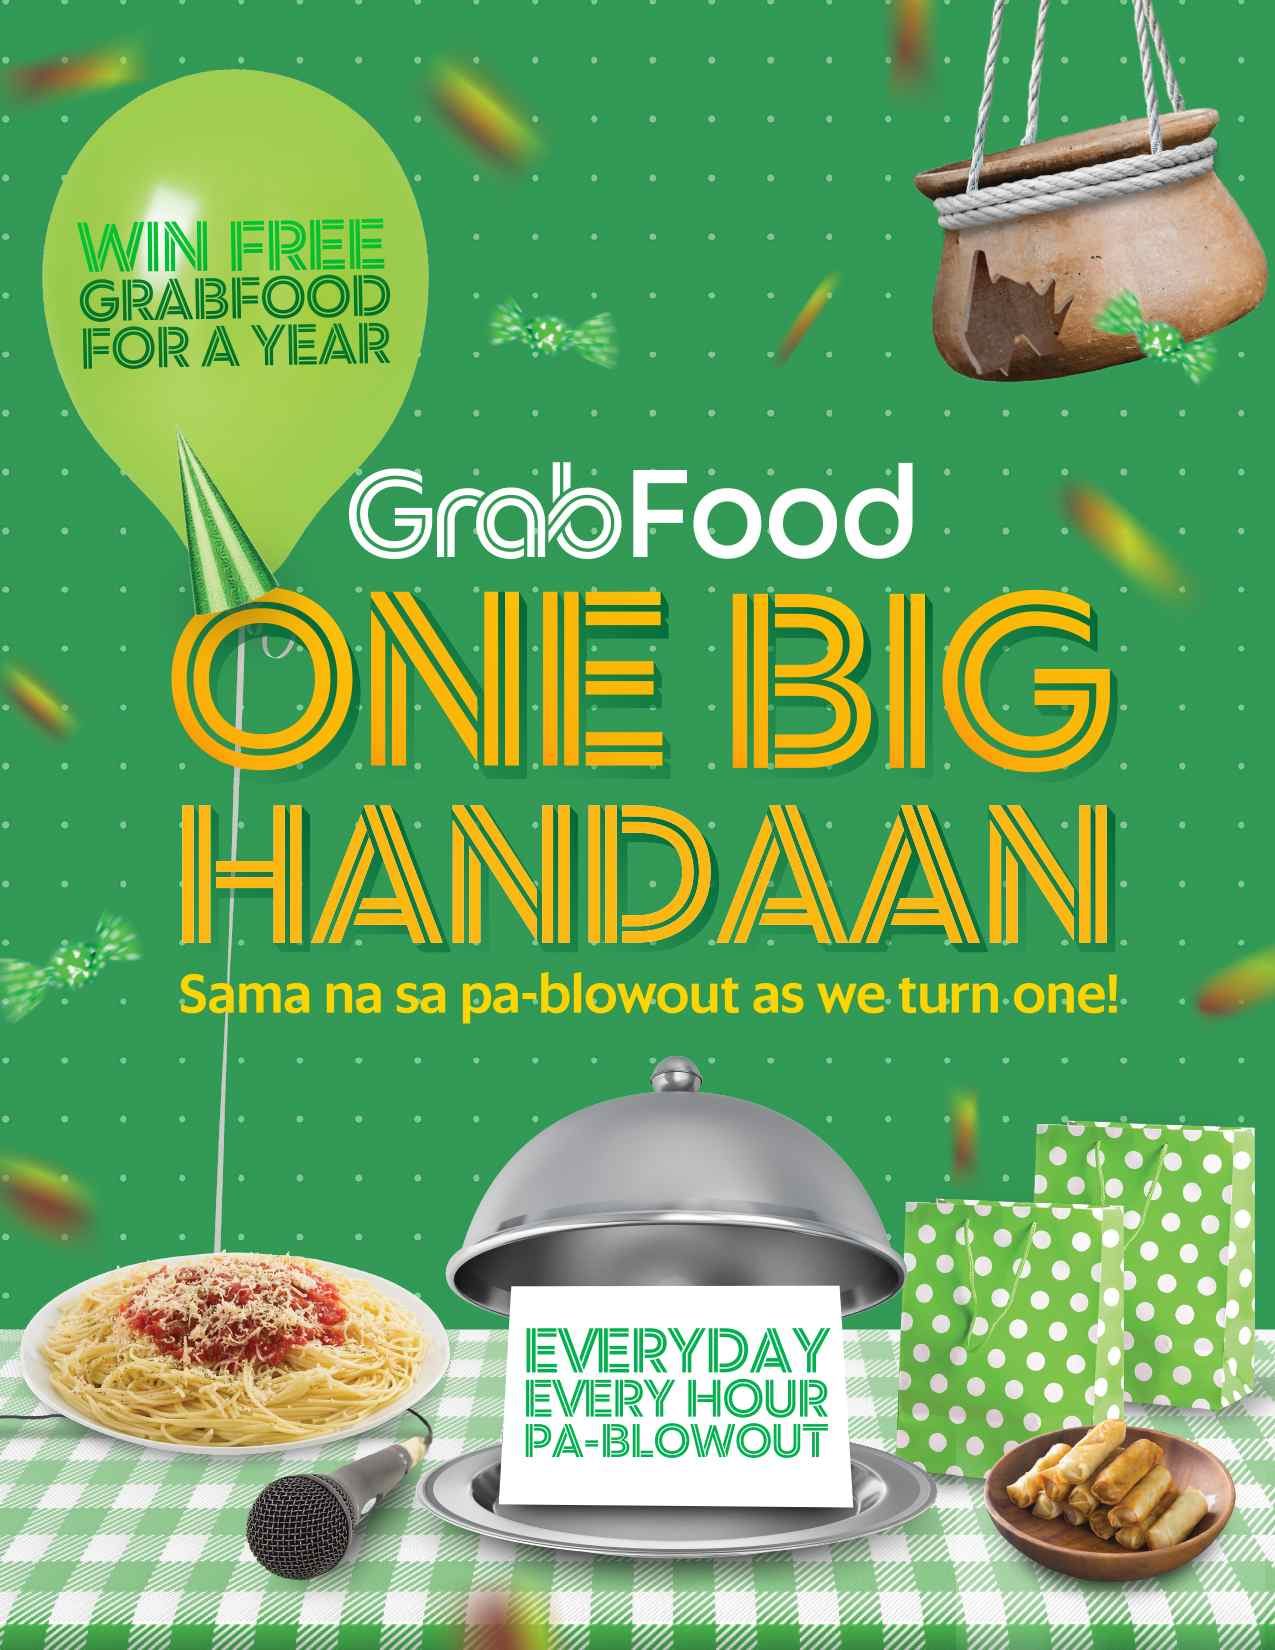 GrabFood celebrates 1st anniversary in the Philippines with ‘One Big Handaan’ – the biggest online feast of 2019